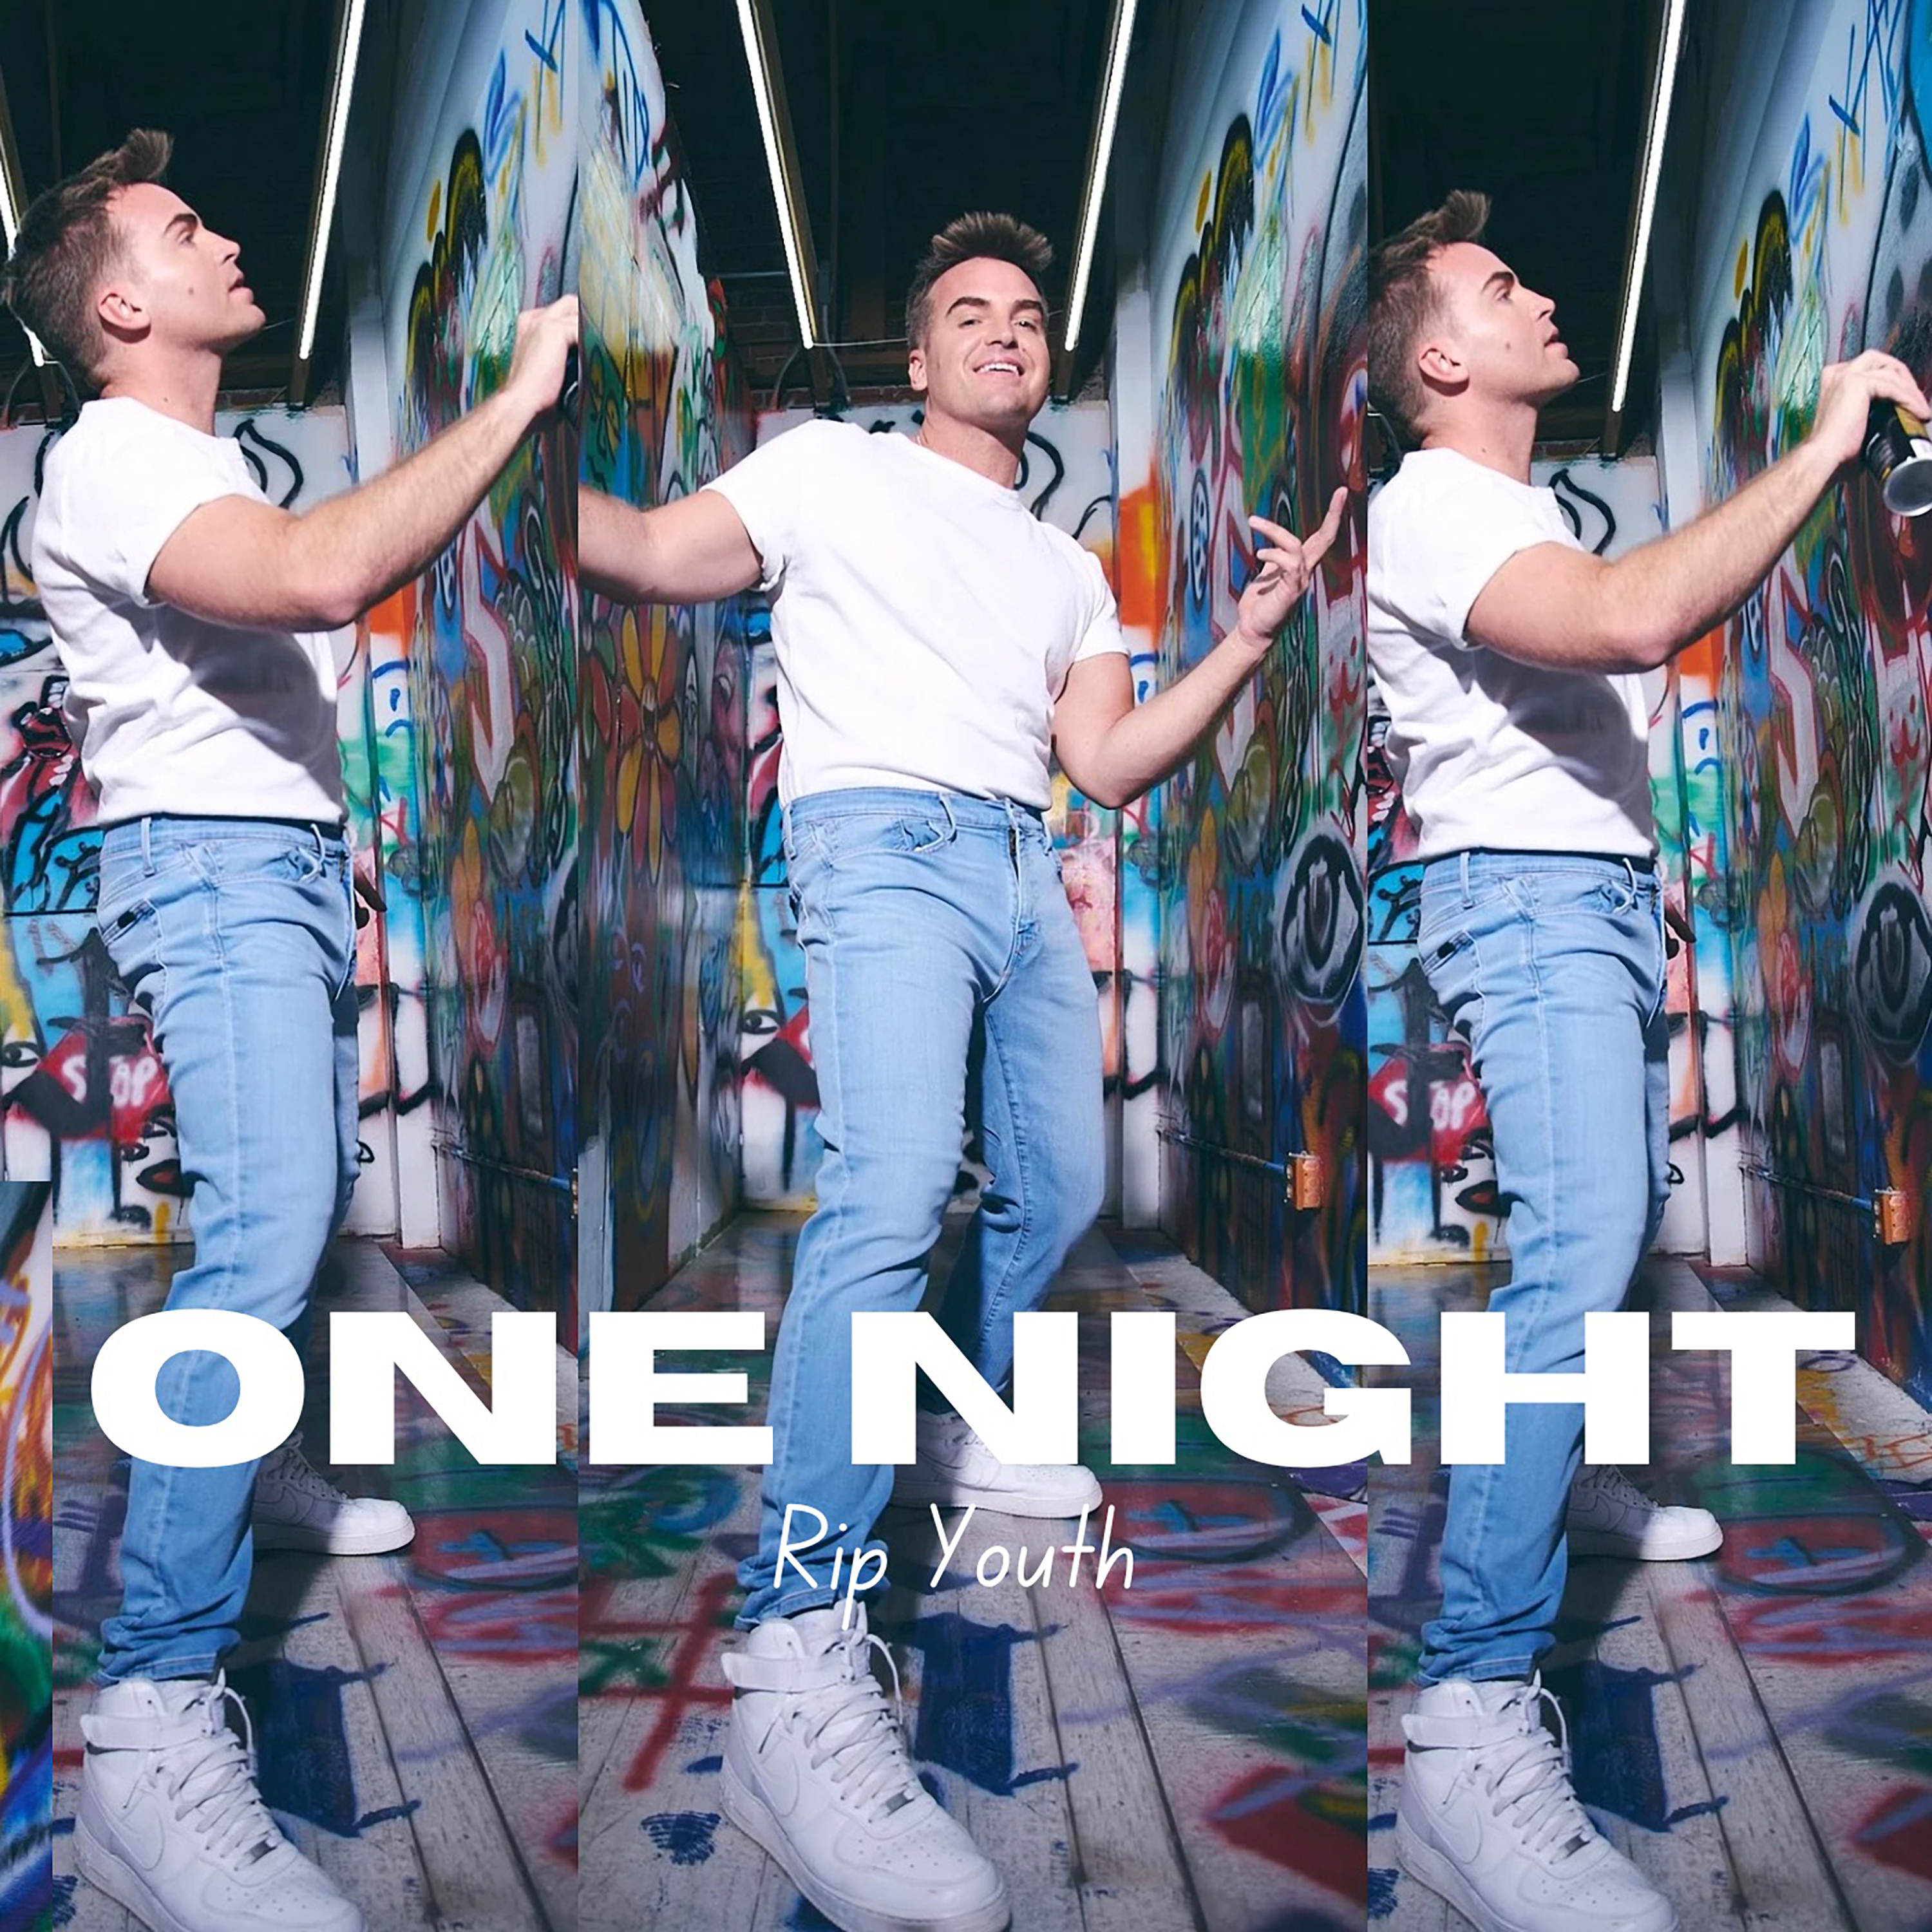 RIP Youth - One Night - Cover Art